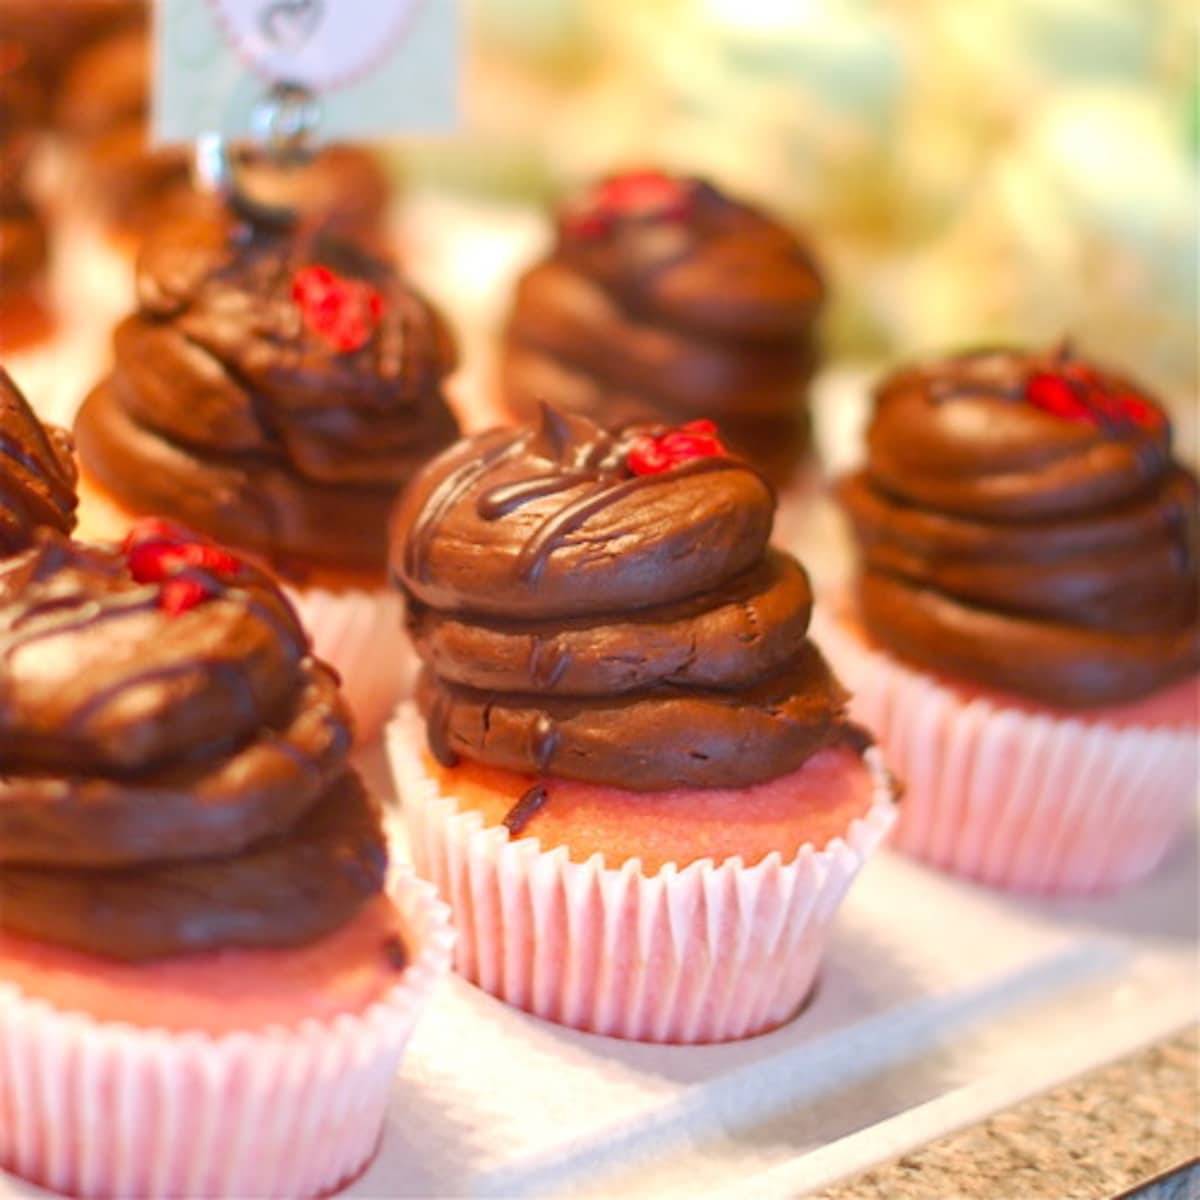 Pink cupcakes with chocolate frosting.